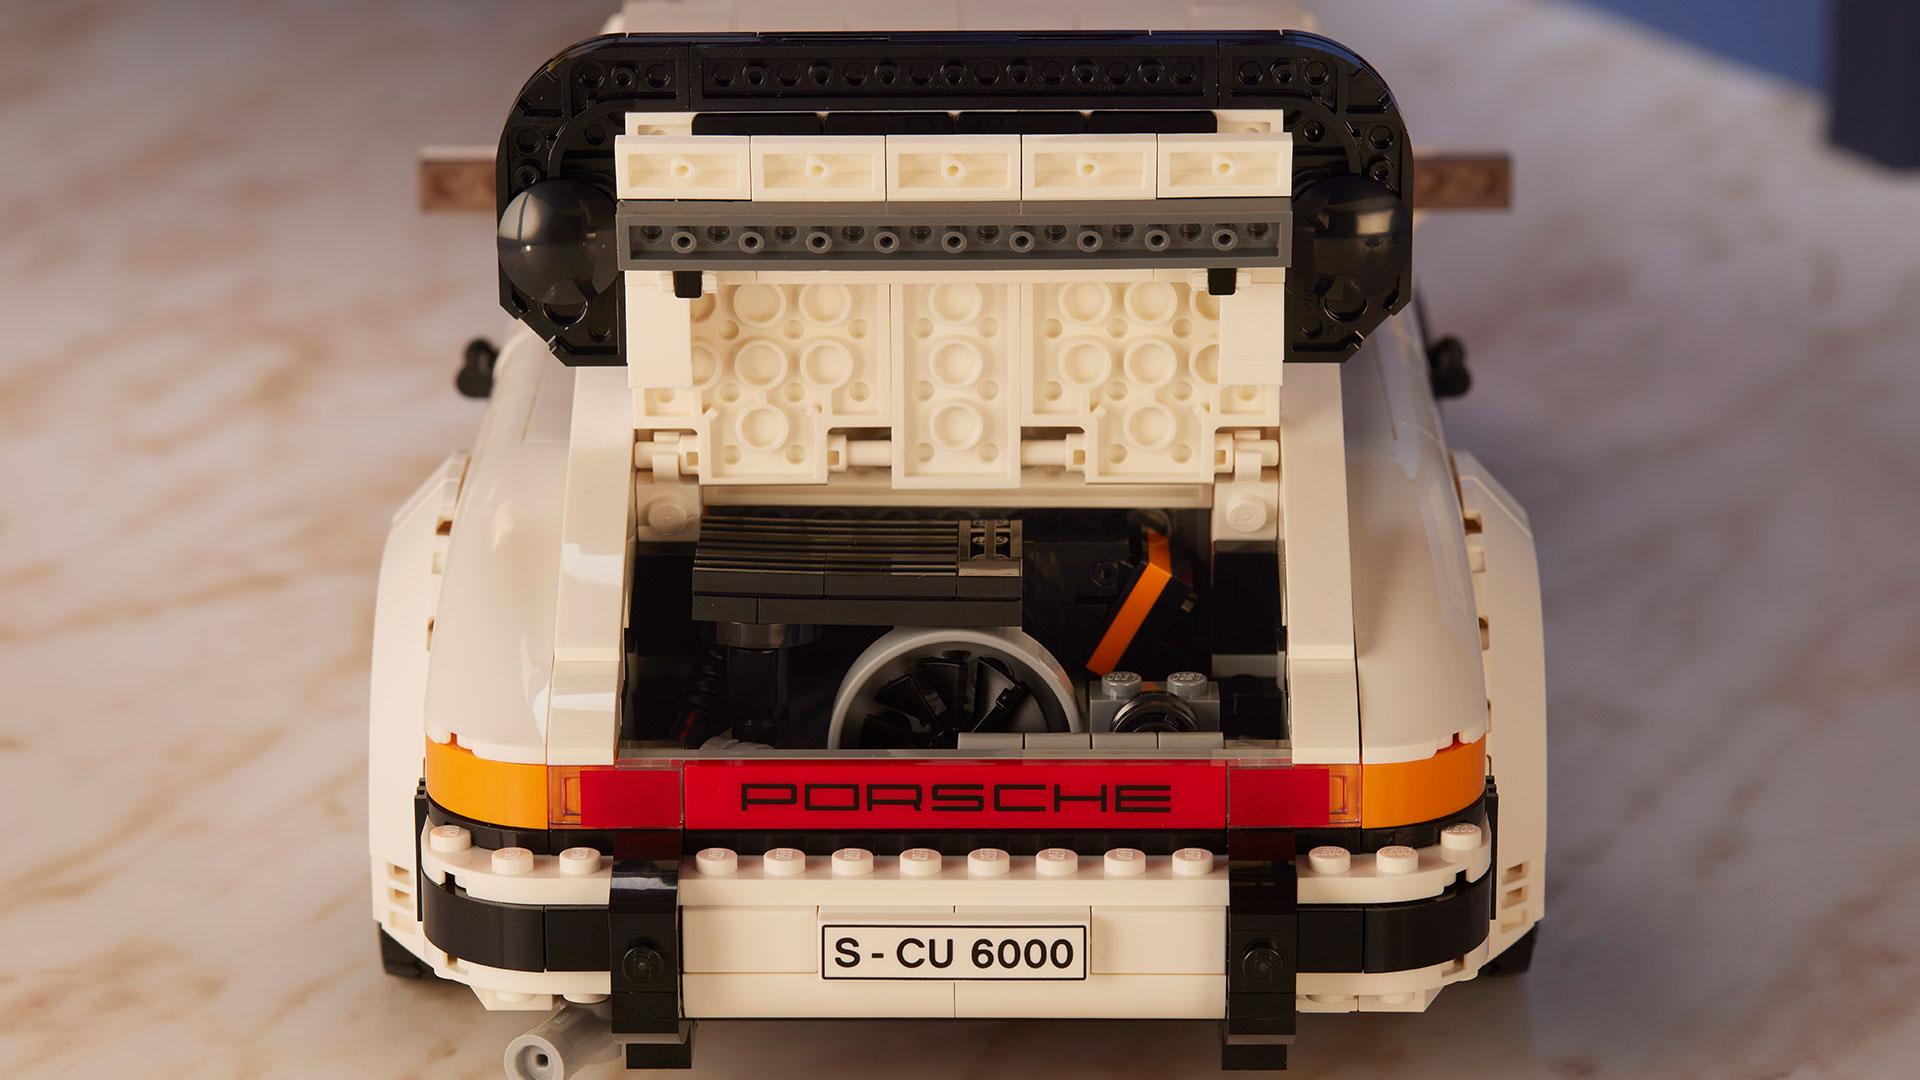 LEGO 10295 Porsche 911 Turbo & 911 Targa  The LEGO® Group has wound the clock back to the era of big hair, new wave and punk rock for the launch of the latest LEGO car set, the two-in-one LEGO Porsche 911 Turbo and 911 Targa bridges the gap across two decades to unite this pair of iconic sports cars.  To celebrate the latest LEGO version of the ubiquitous rear-engined German sports car, LEGO has collaborated with Porsche to recreate a selection of the most vivid adverts from the model’s history, this time starring the smaller but equally desirable LEGO namesake. 